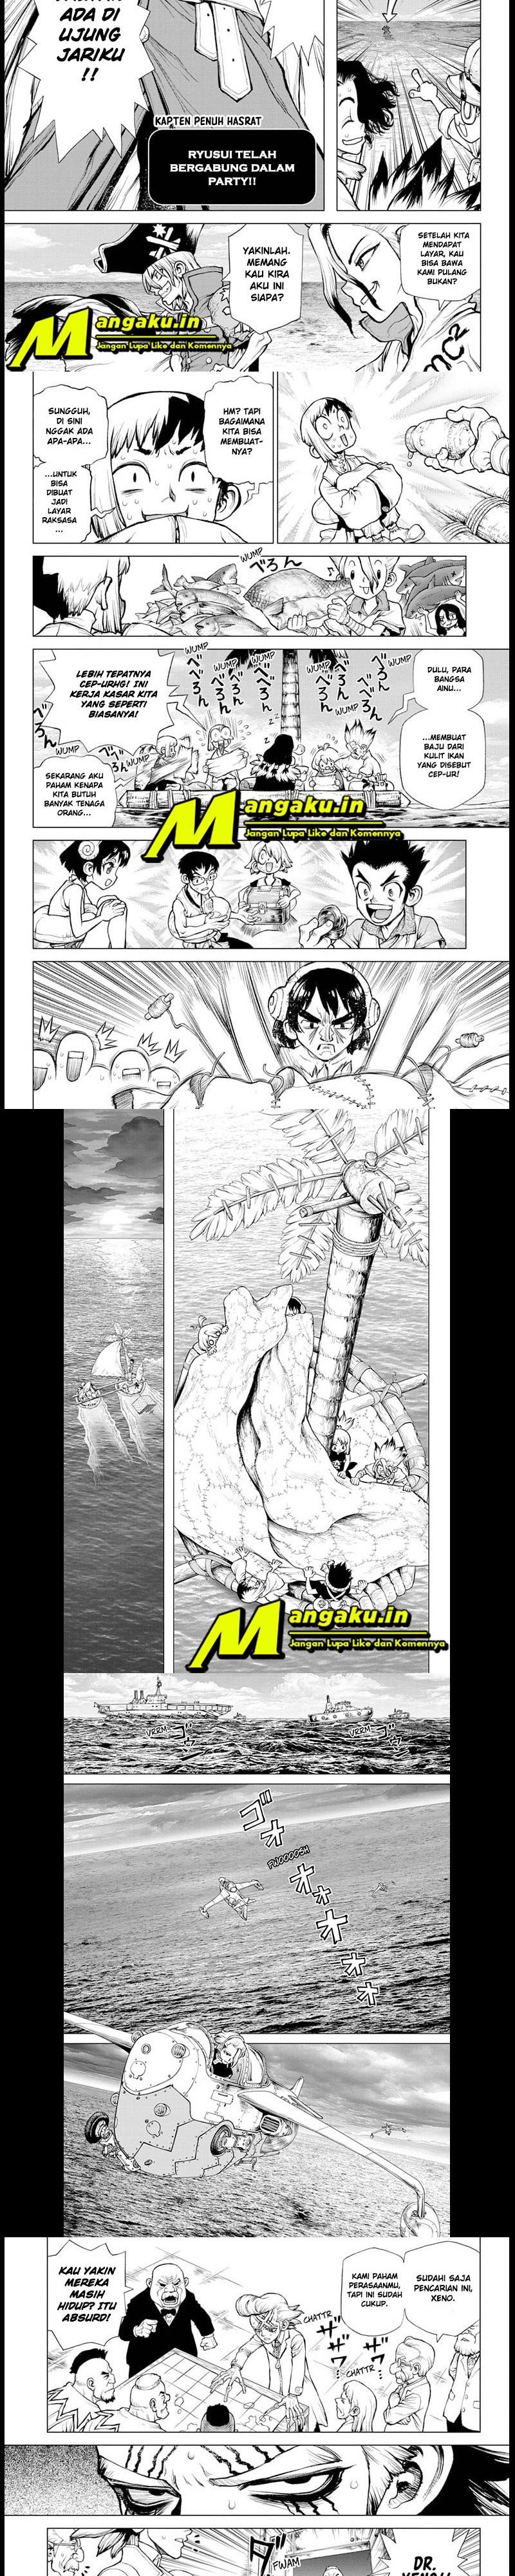 Dr. Stone Chapter 232.3